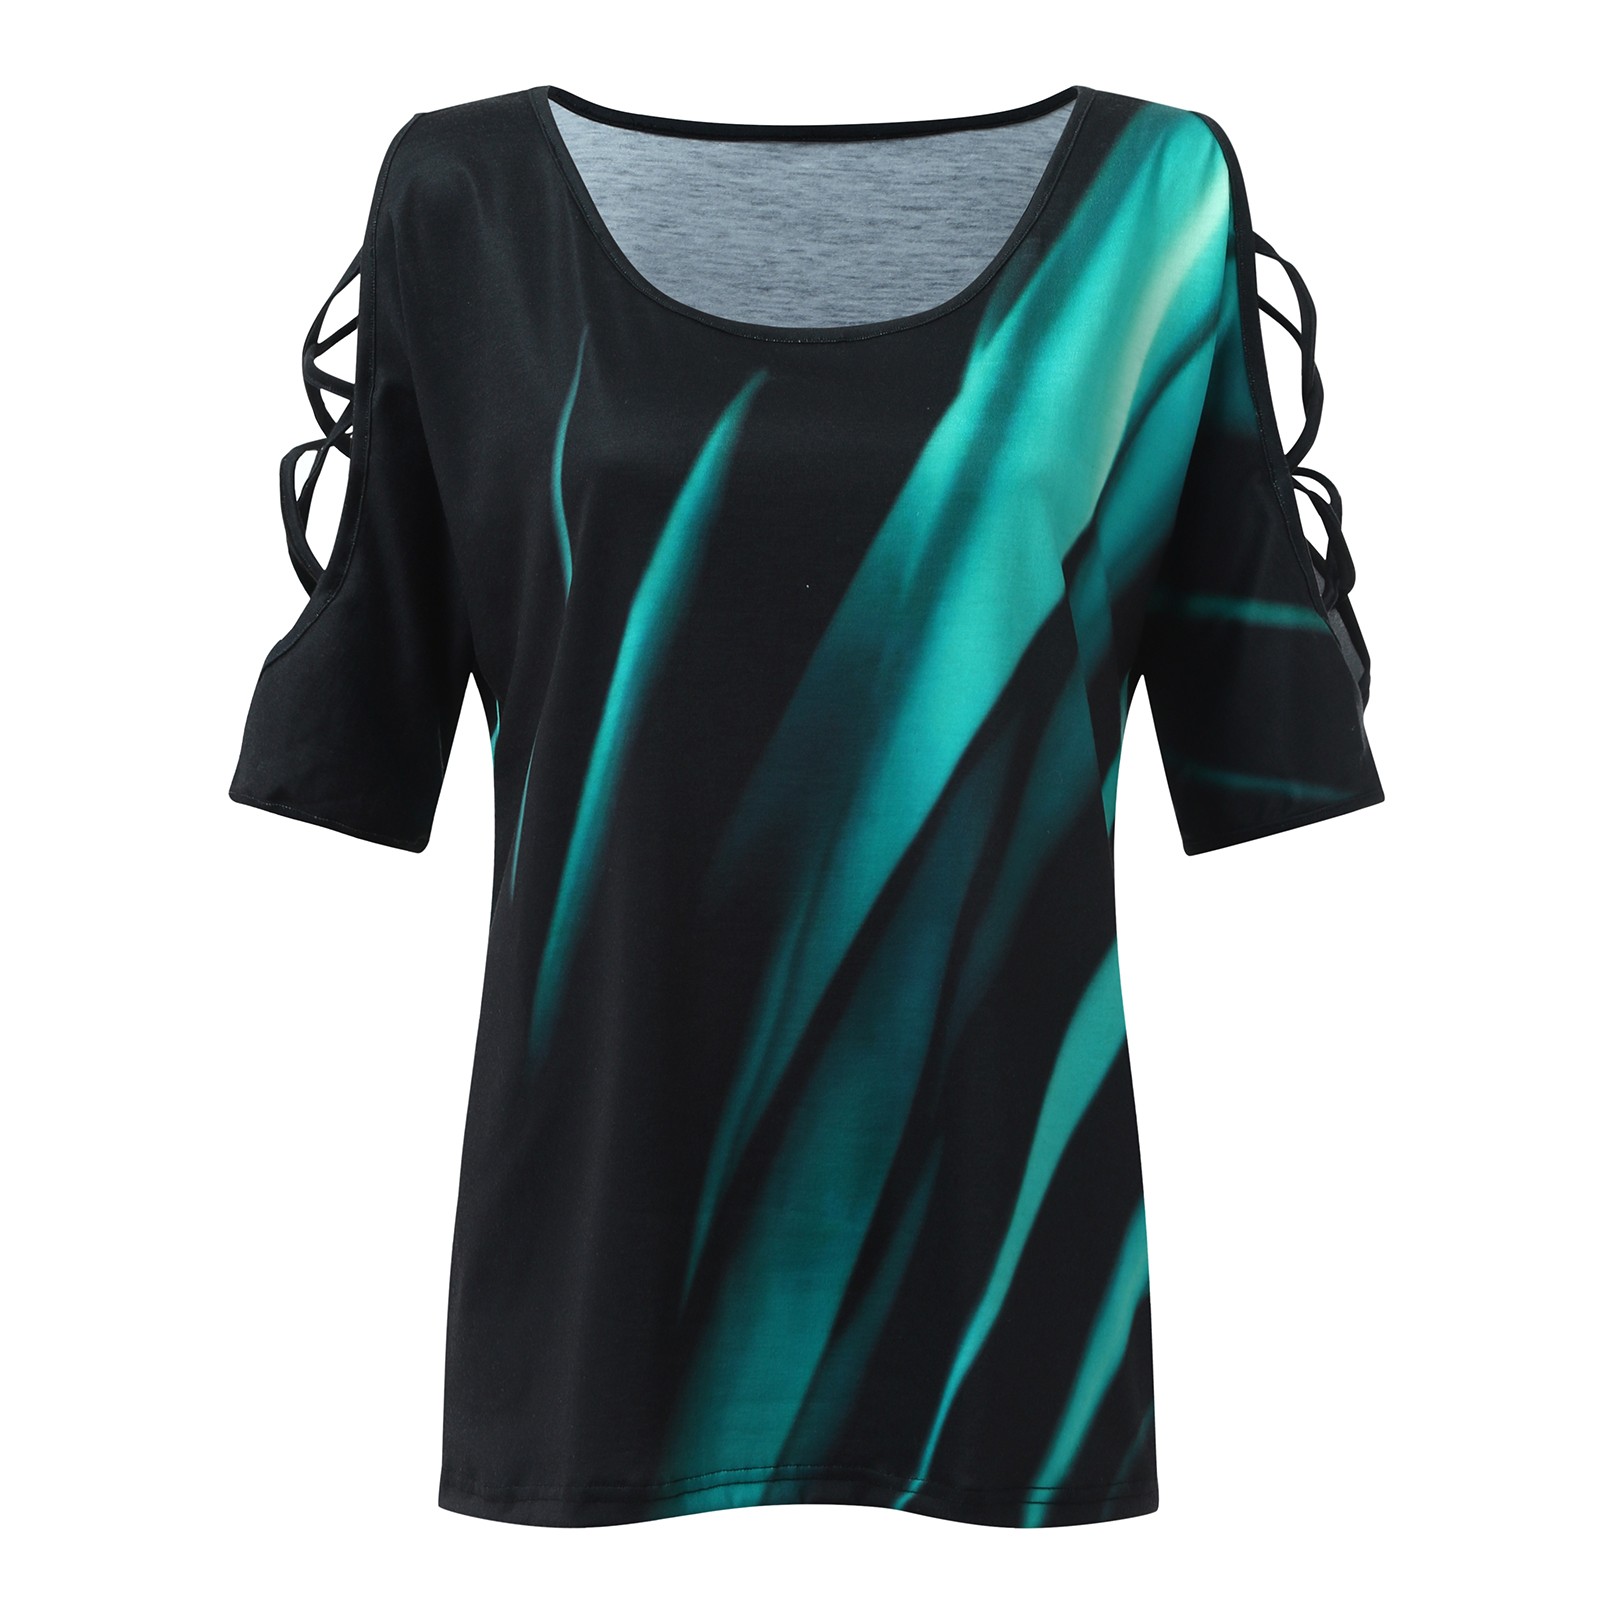 Women Positioning Line Contrast Printing Hollow Round Neck Short-Sleeved Top - image 3 of 6